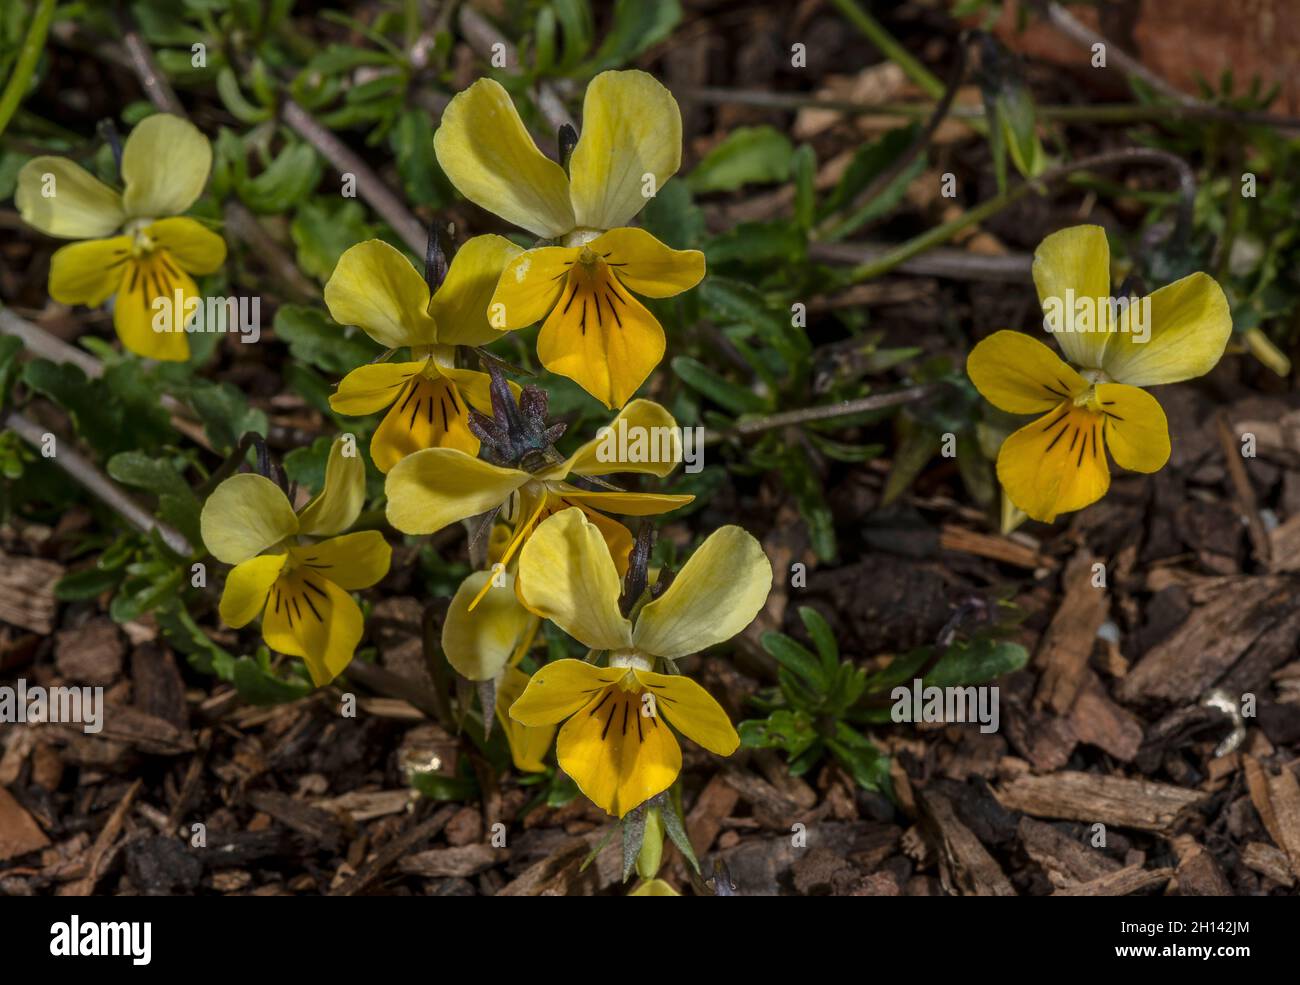 Dune Pansy, Viola tricolor ssp curtisii, in flower on sand dunes, Wales. Stock Photo